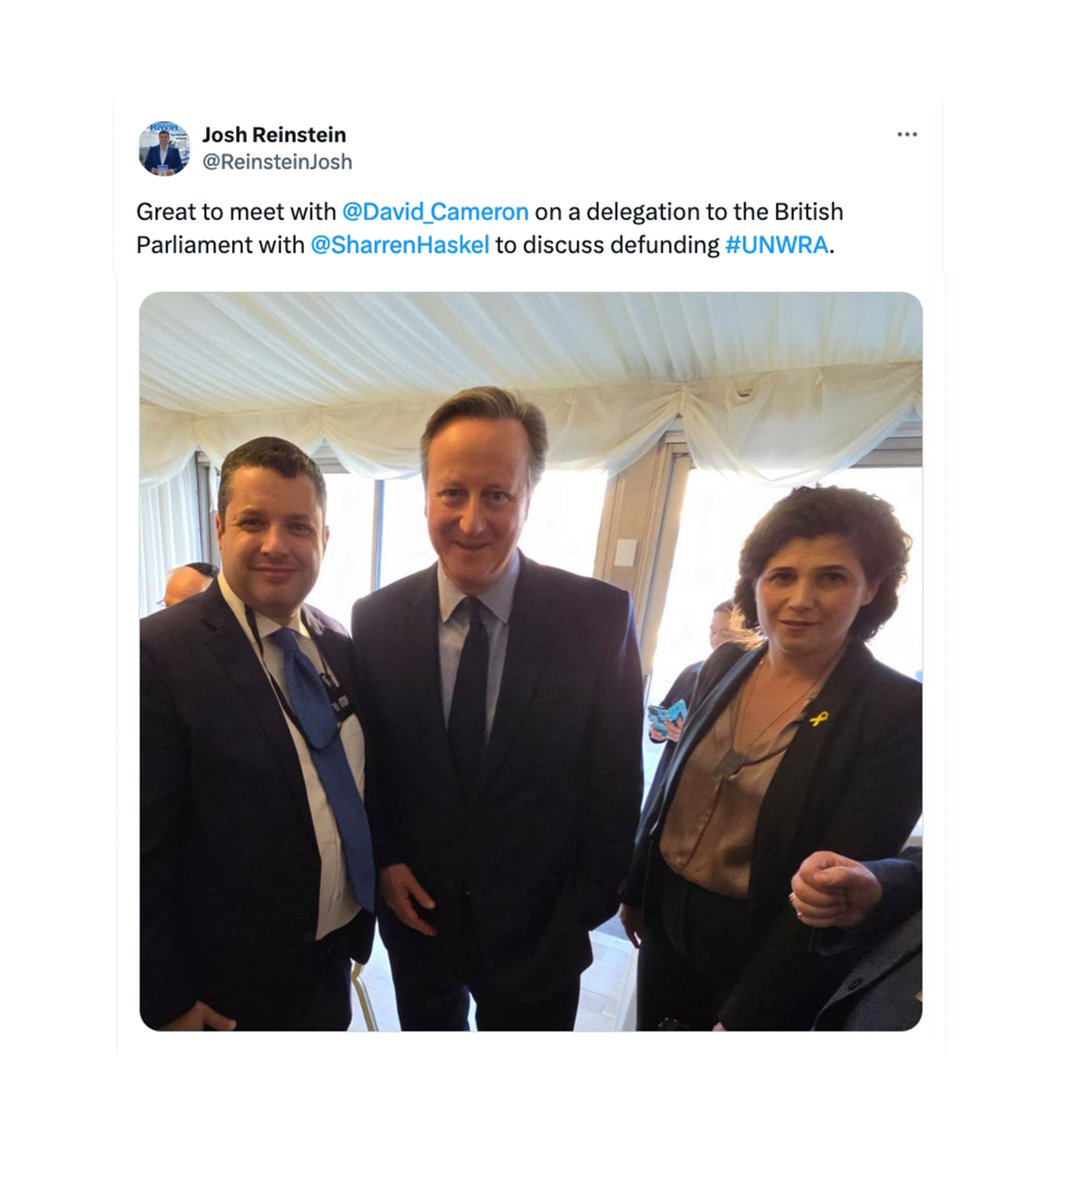 [1] Yesterday, Foreign Sec @David_Cameron met with anti-UNRWA extremists, who were in Parliament to spread discredited smears against the UN aid agency. As starvation takes hold, and a Rafah invasion threatens 1.4m lives, this is inexcusable. It brings shame on @FCDOGovUK.